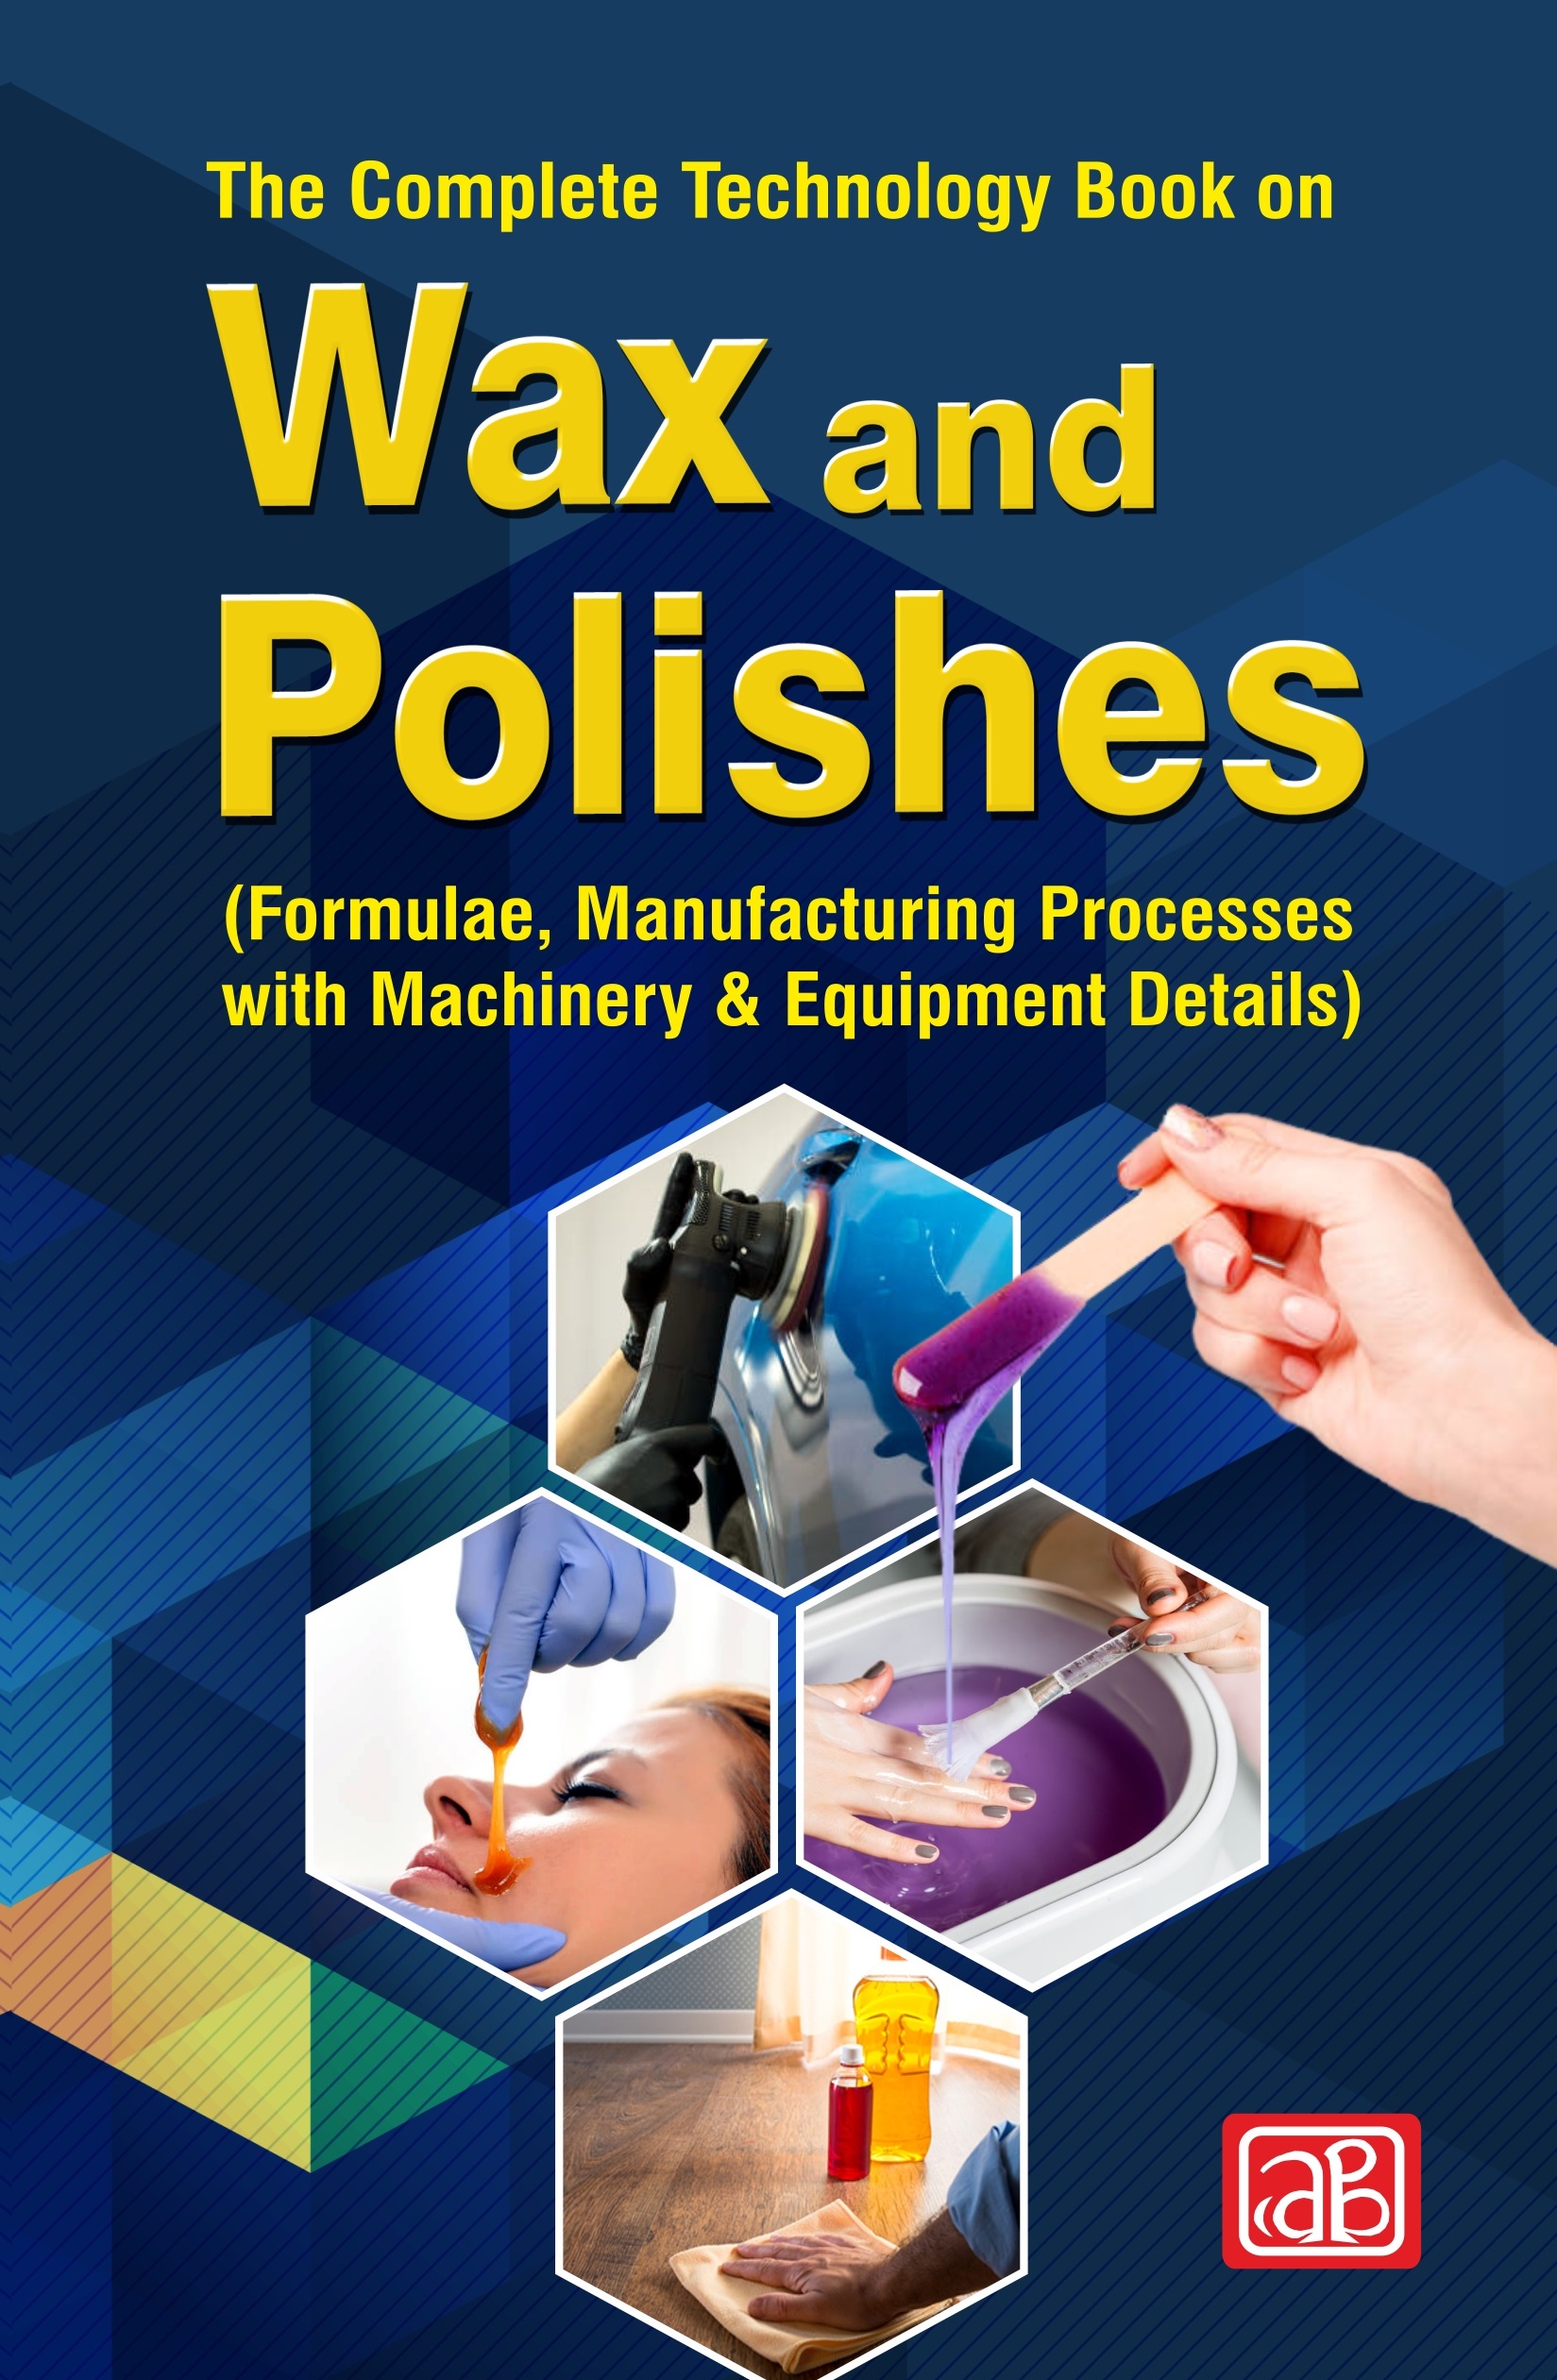 The Complete Technology Book on Wax and Polishes (Formulae, Manufacturing Processes with Machinery & Equipment Details) 2nd Revised Edition